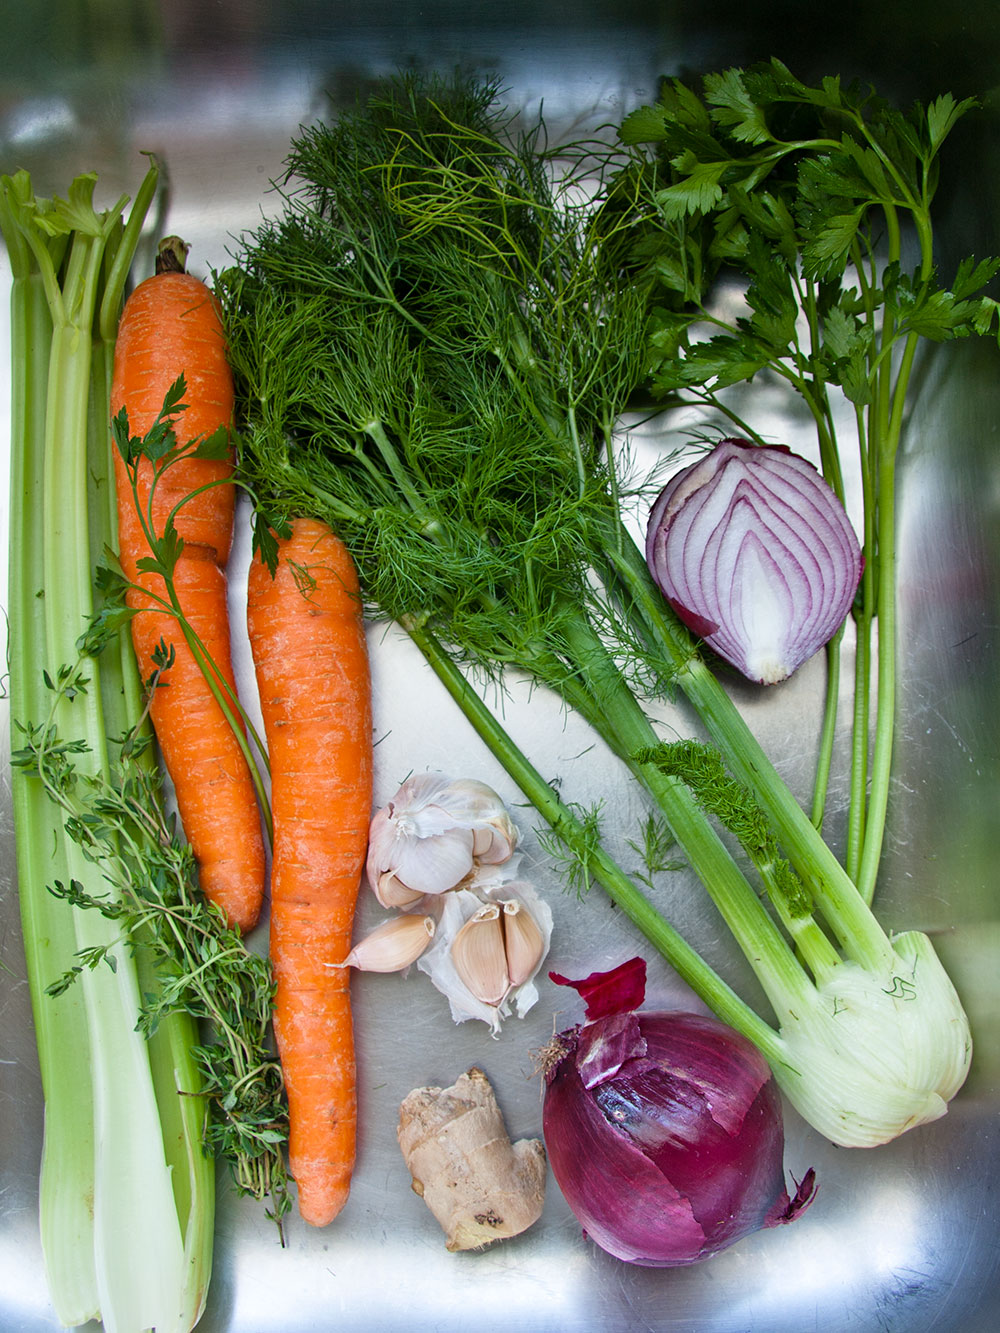 How to Make a Flavorful Vegetable Broth